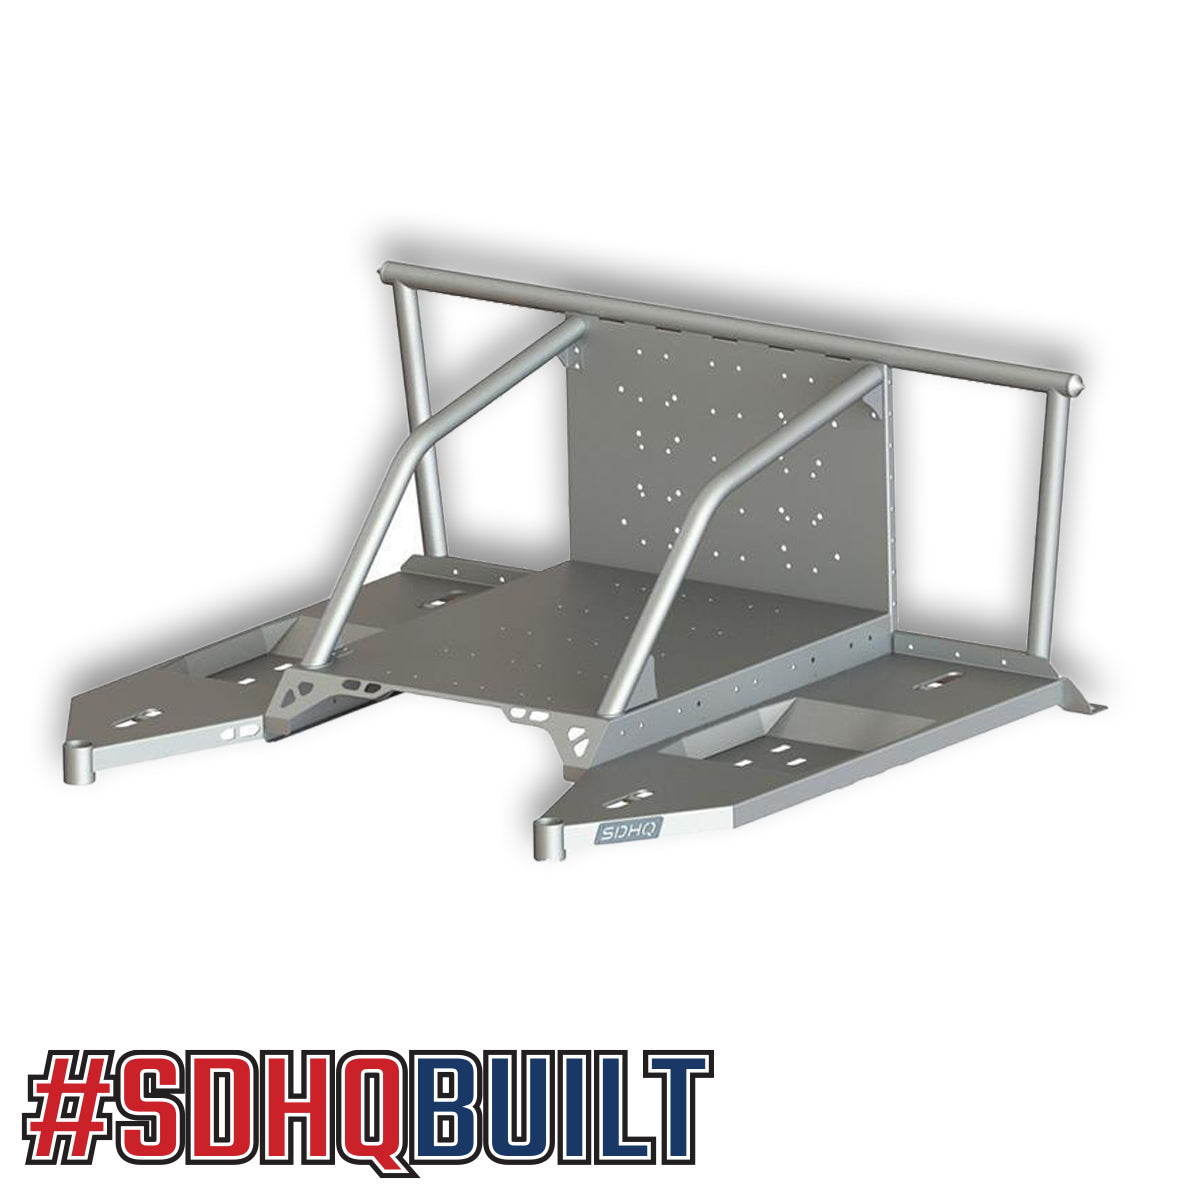 '17-23 Ford F250/350 SDHQ Built In Bed Chase Rack